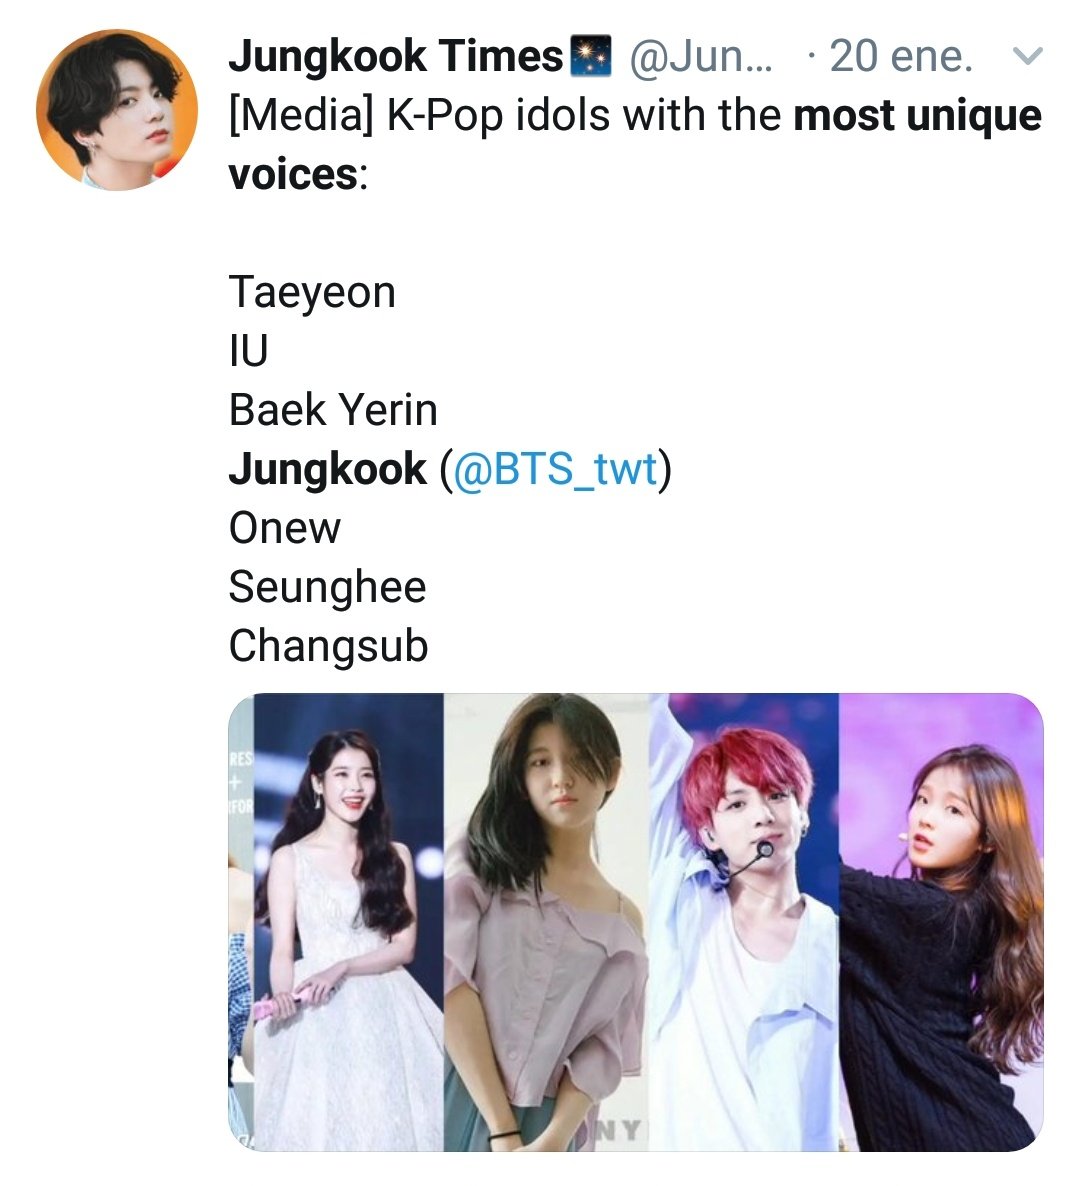 Jungkook being chosen as one of the idols with the most unique voices and best male singers in WHOLE K-pop by media and netizens multiple times. Without a doubt he's widely considered by both GP and professionals of the industry as a top singer 